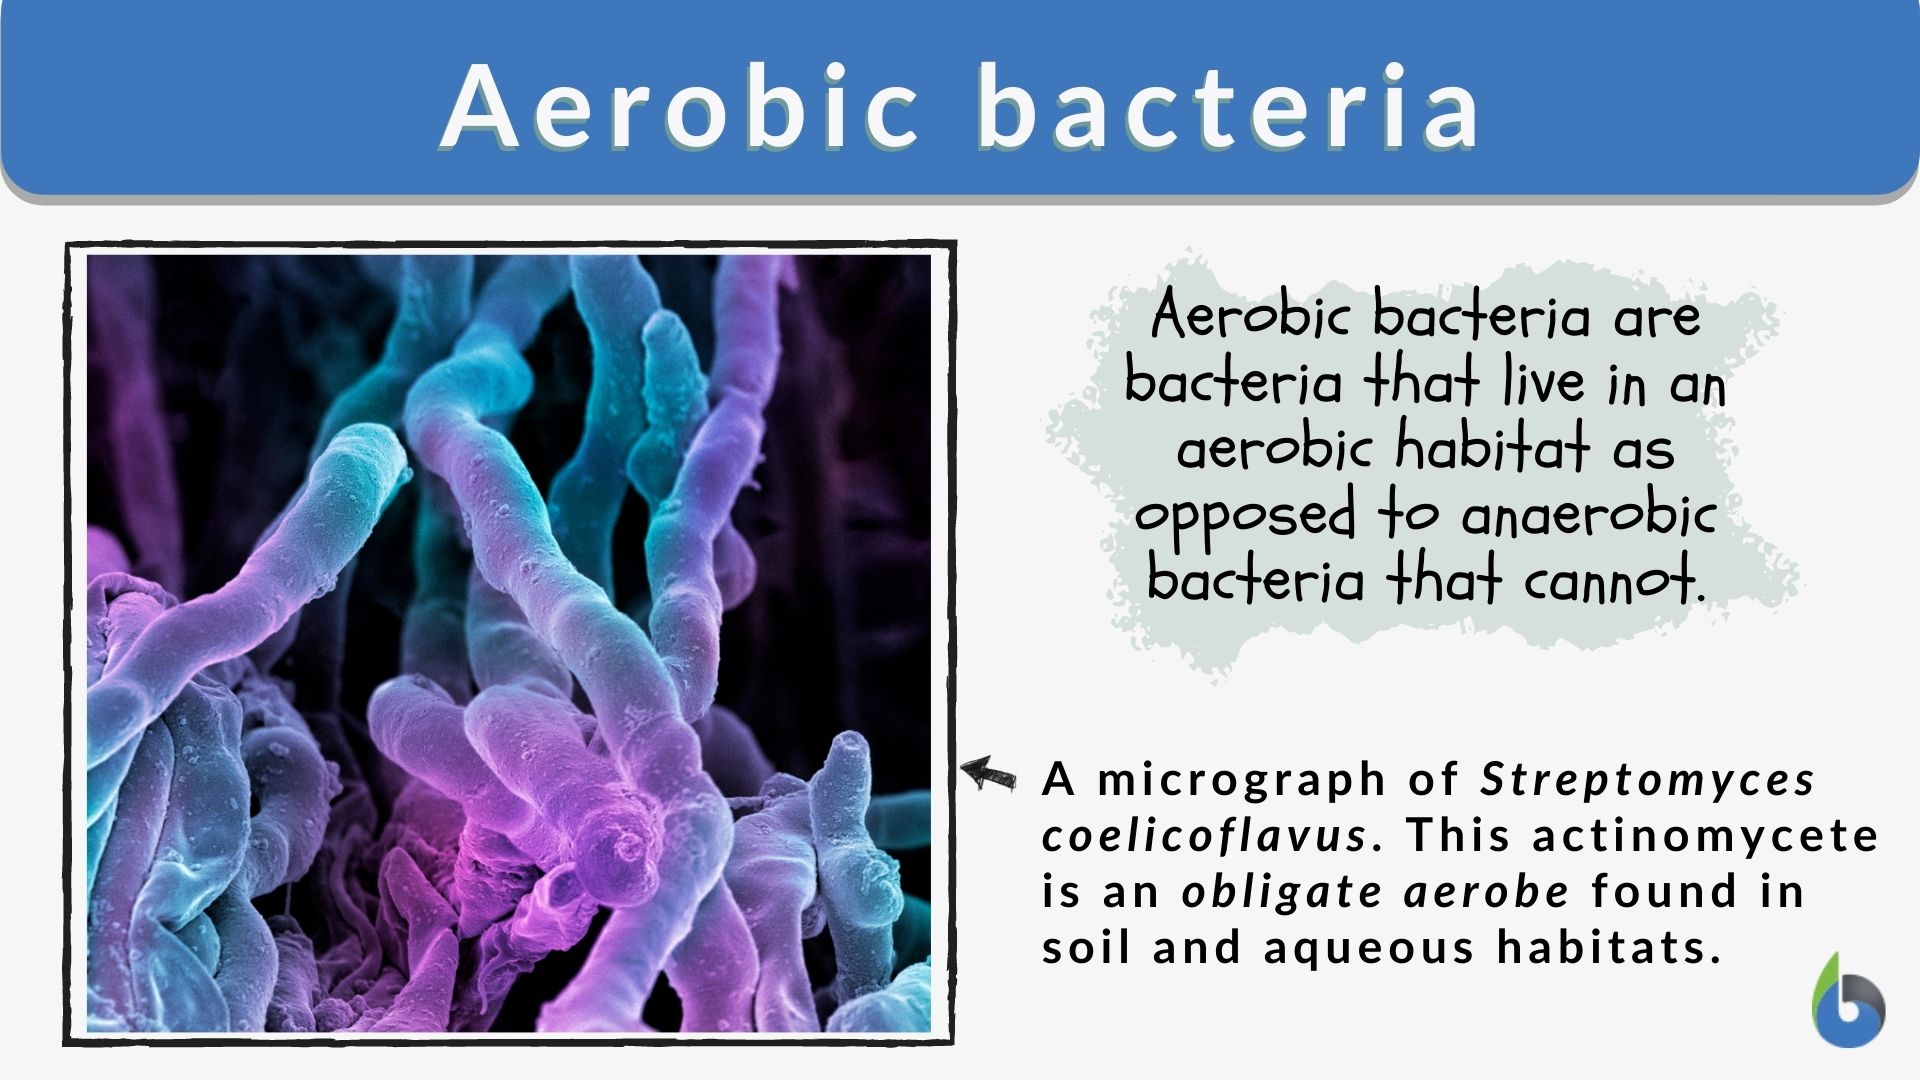 Aerobic bacteria - Definition and Examples - Biology Online Dictionary